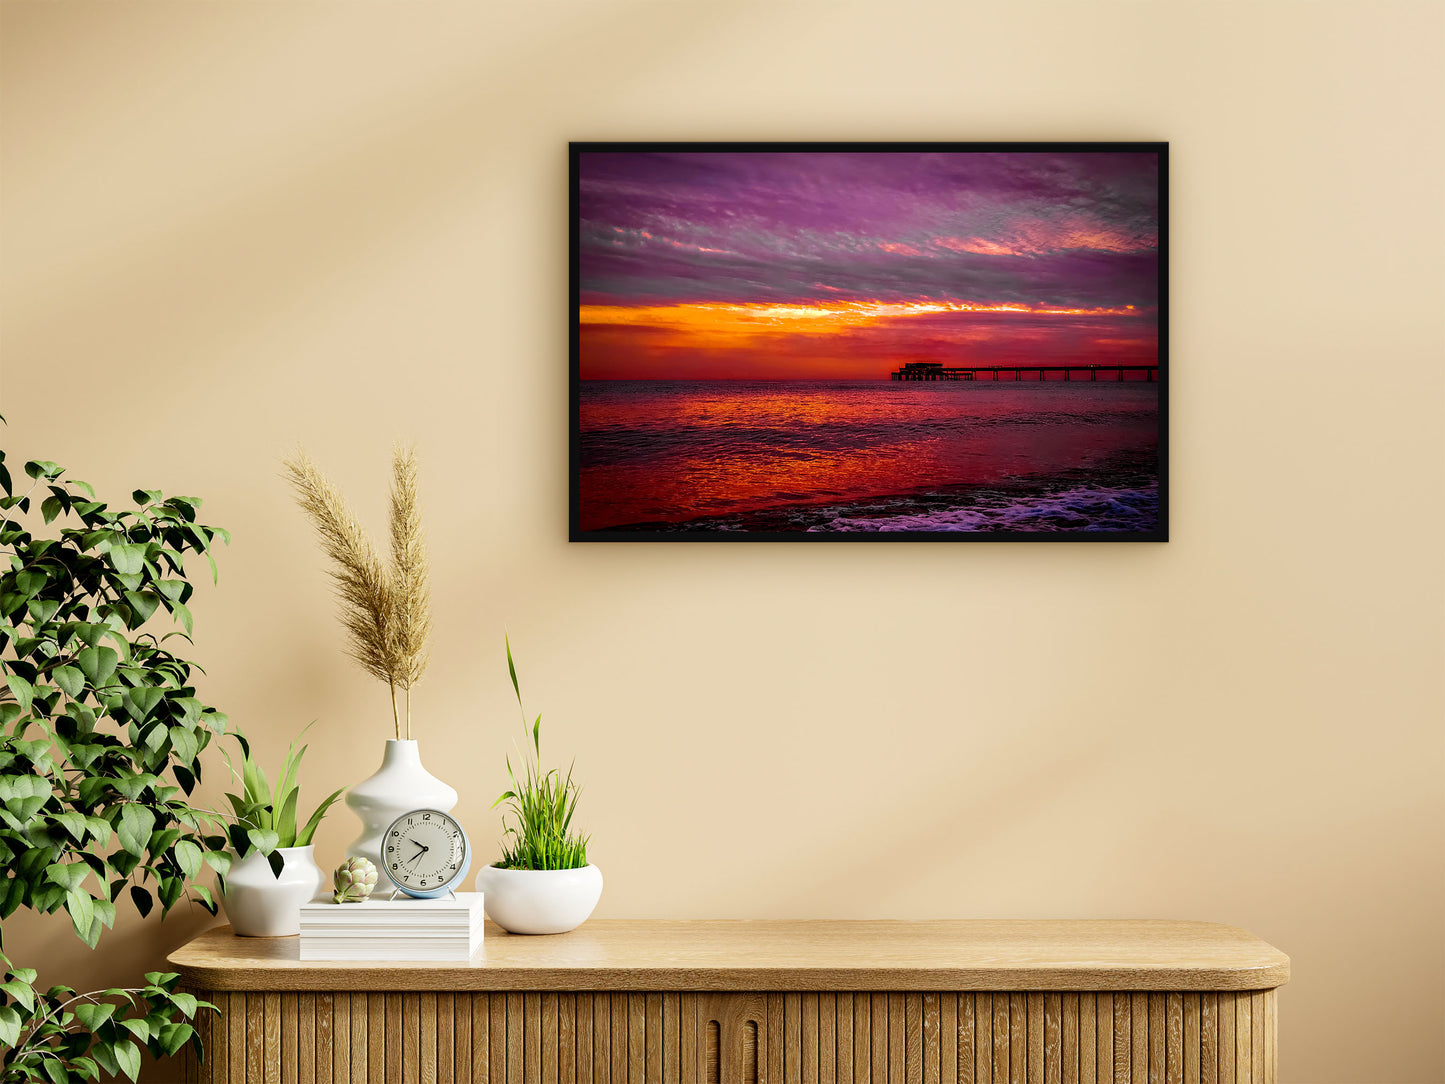 Sun Rise That I Took Over Deal Pier In Kent Wall Art